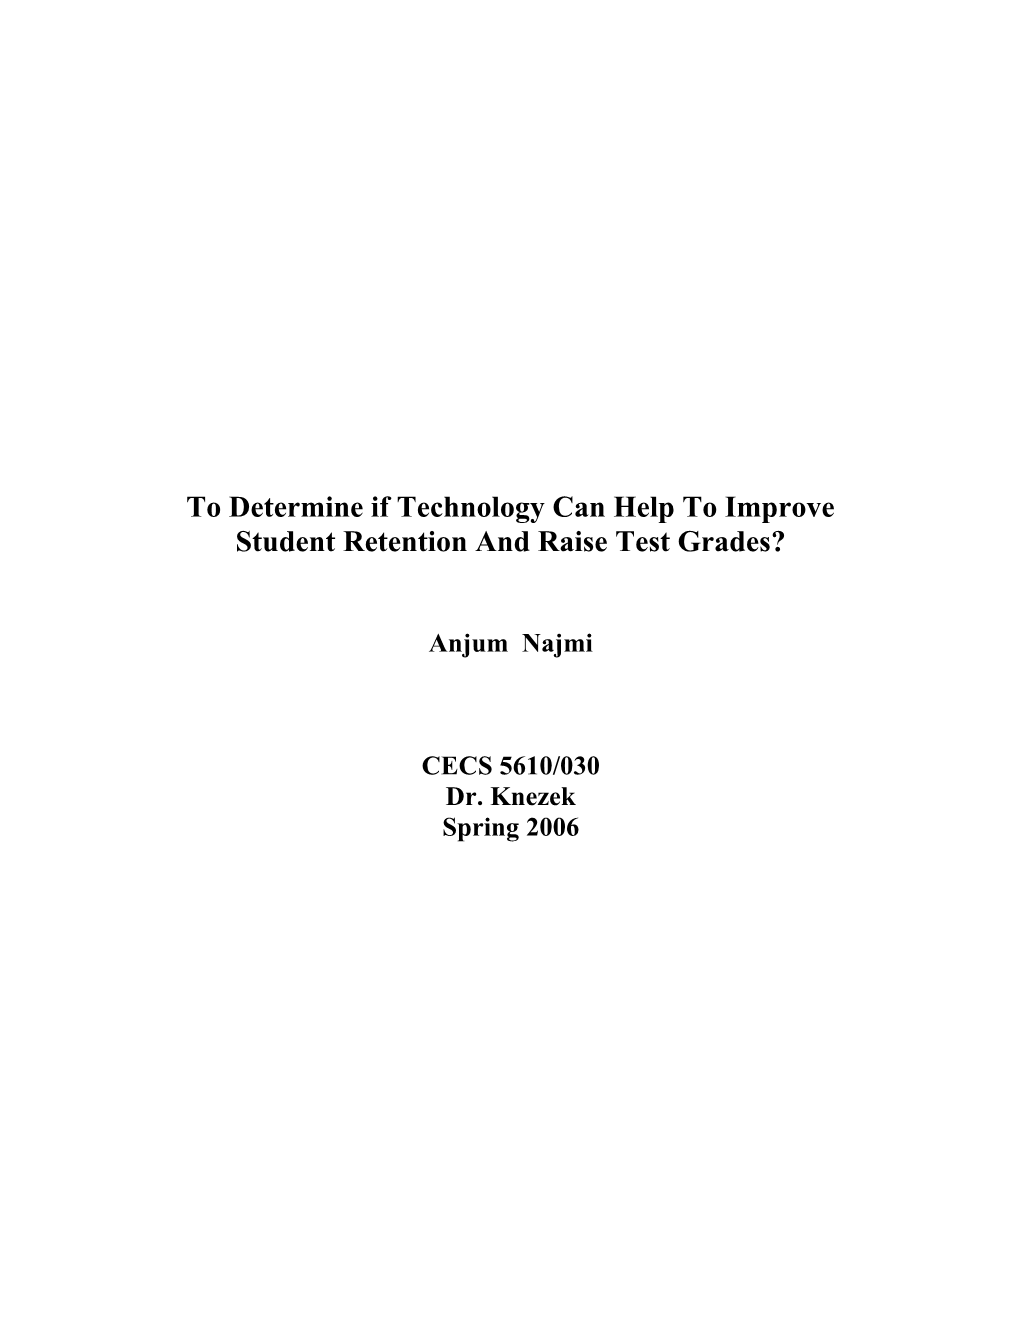 To Determine If Technology Can Help to Improve